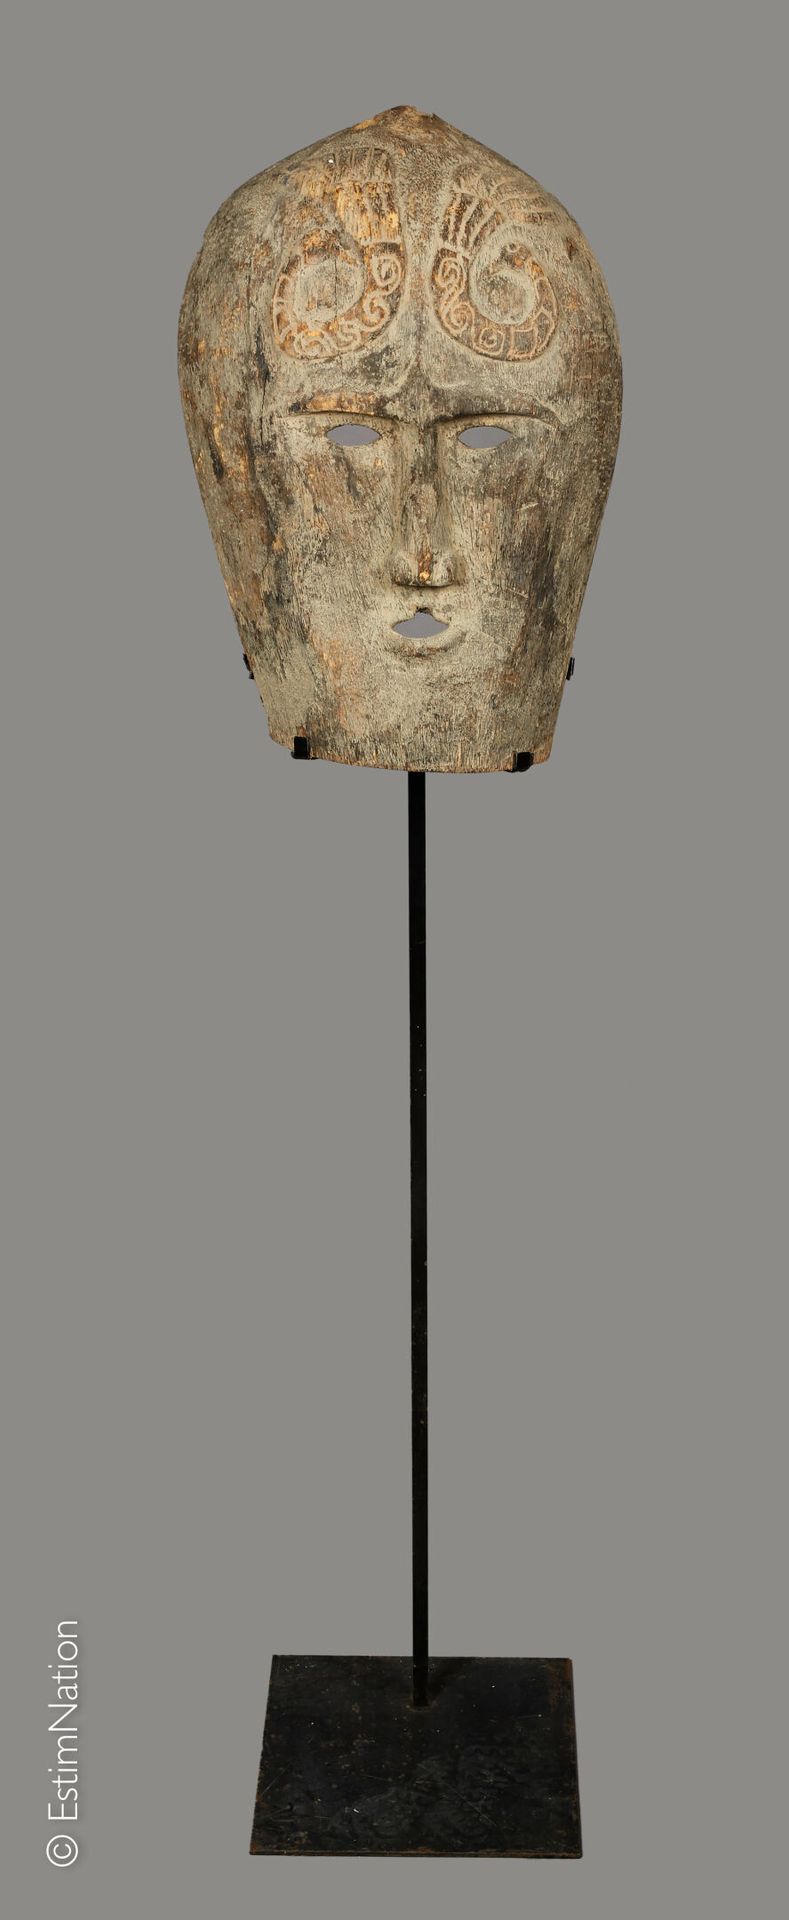 TIMOR TIMOR



Anthropomorphic mask in sculpted wood with engraved decoration of&hellip;